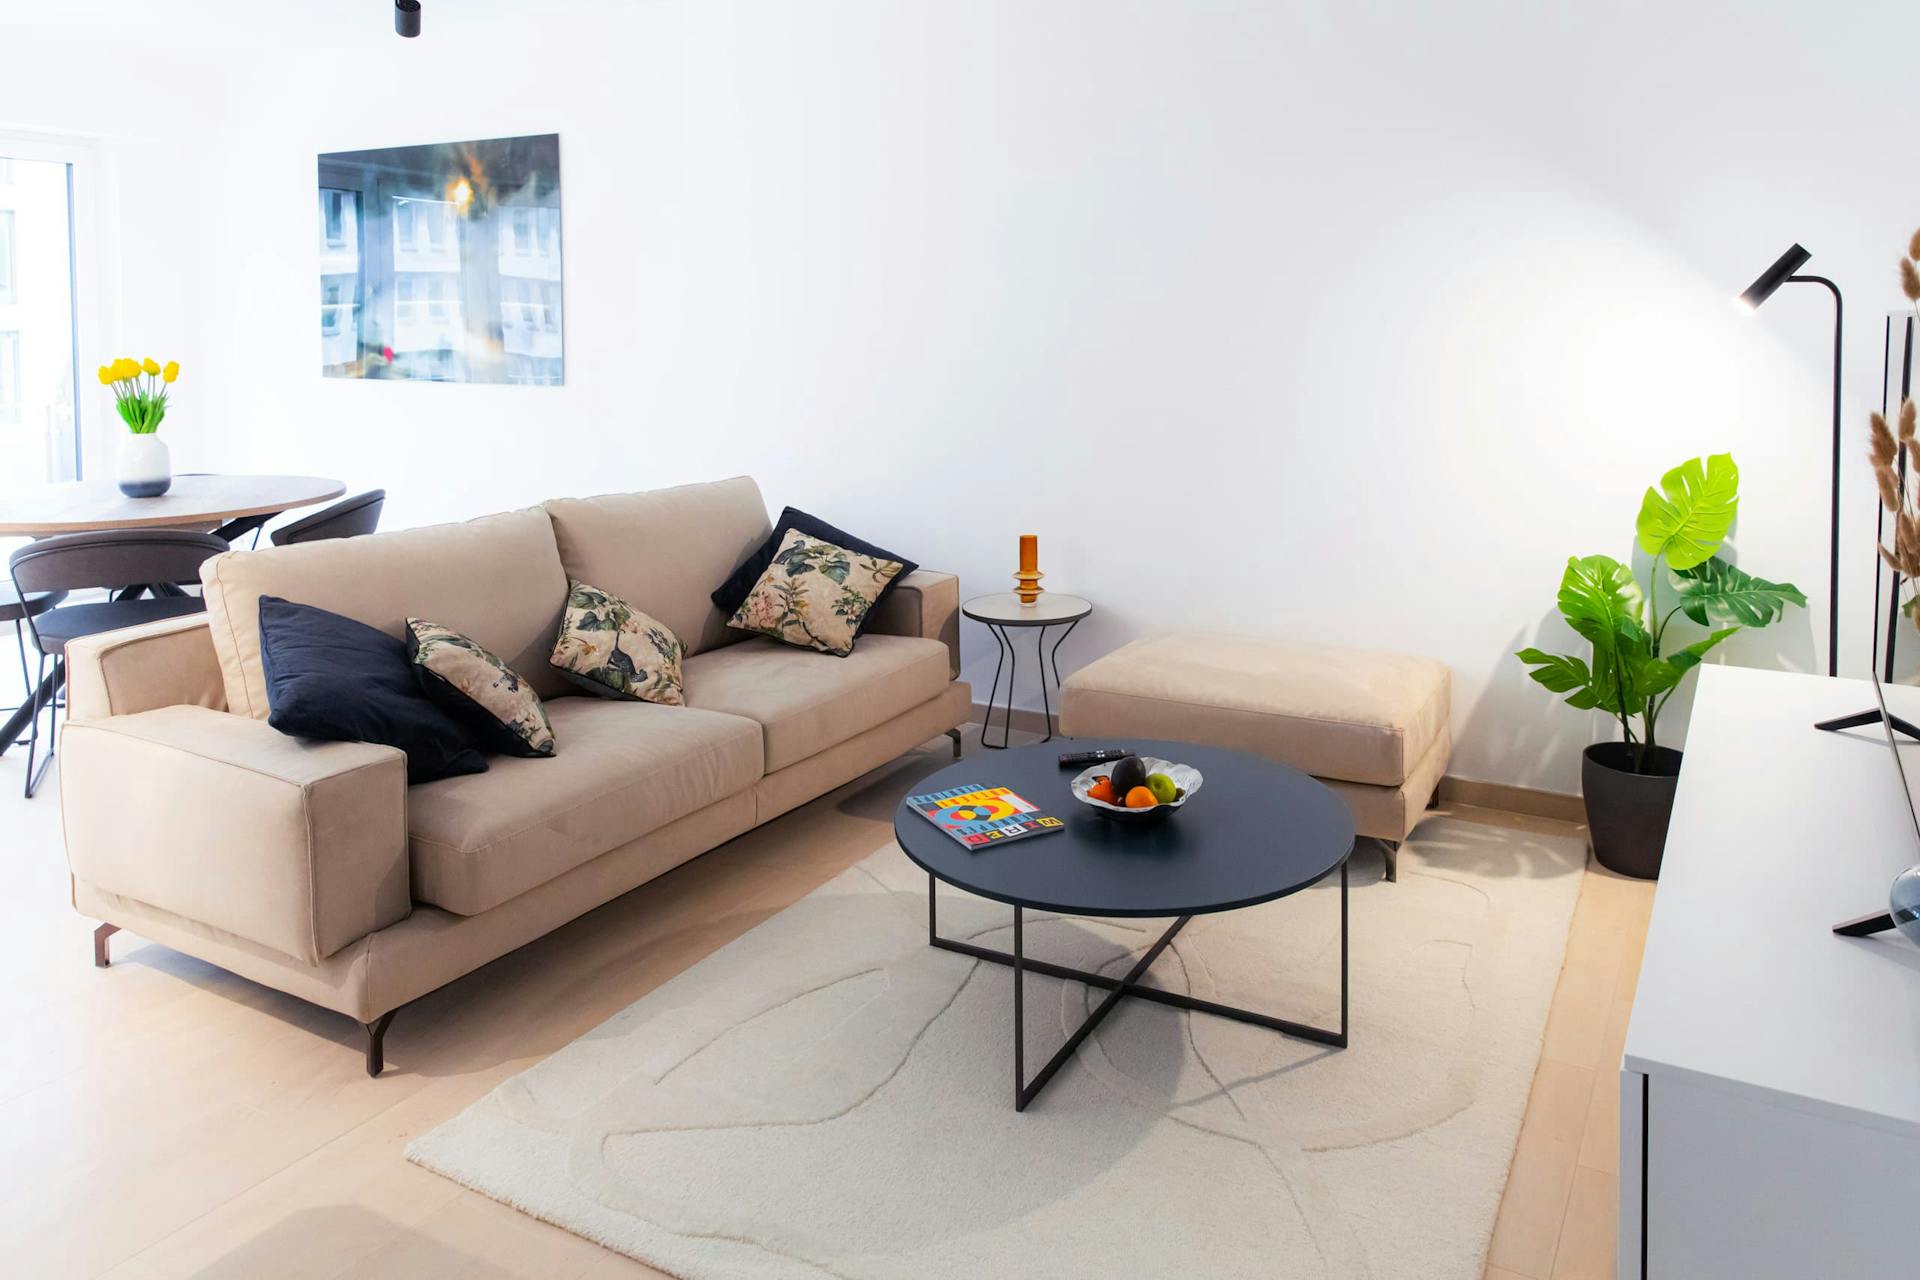 Sofa with cushions on it. In front, is a medium-sized coffee table, a TV stand with a smart TV on it, and next, a small armchair. Behind the sofa is a dining table with chairs, next to large windows. On the wall, hangs a big picture.